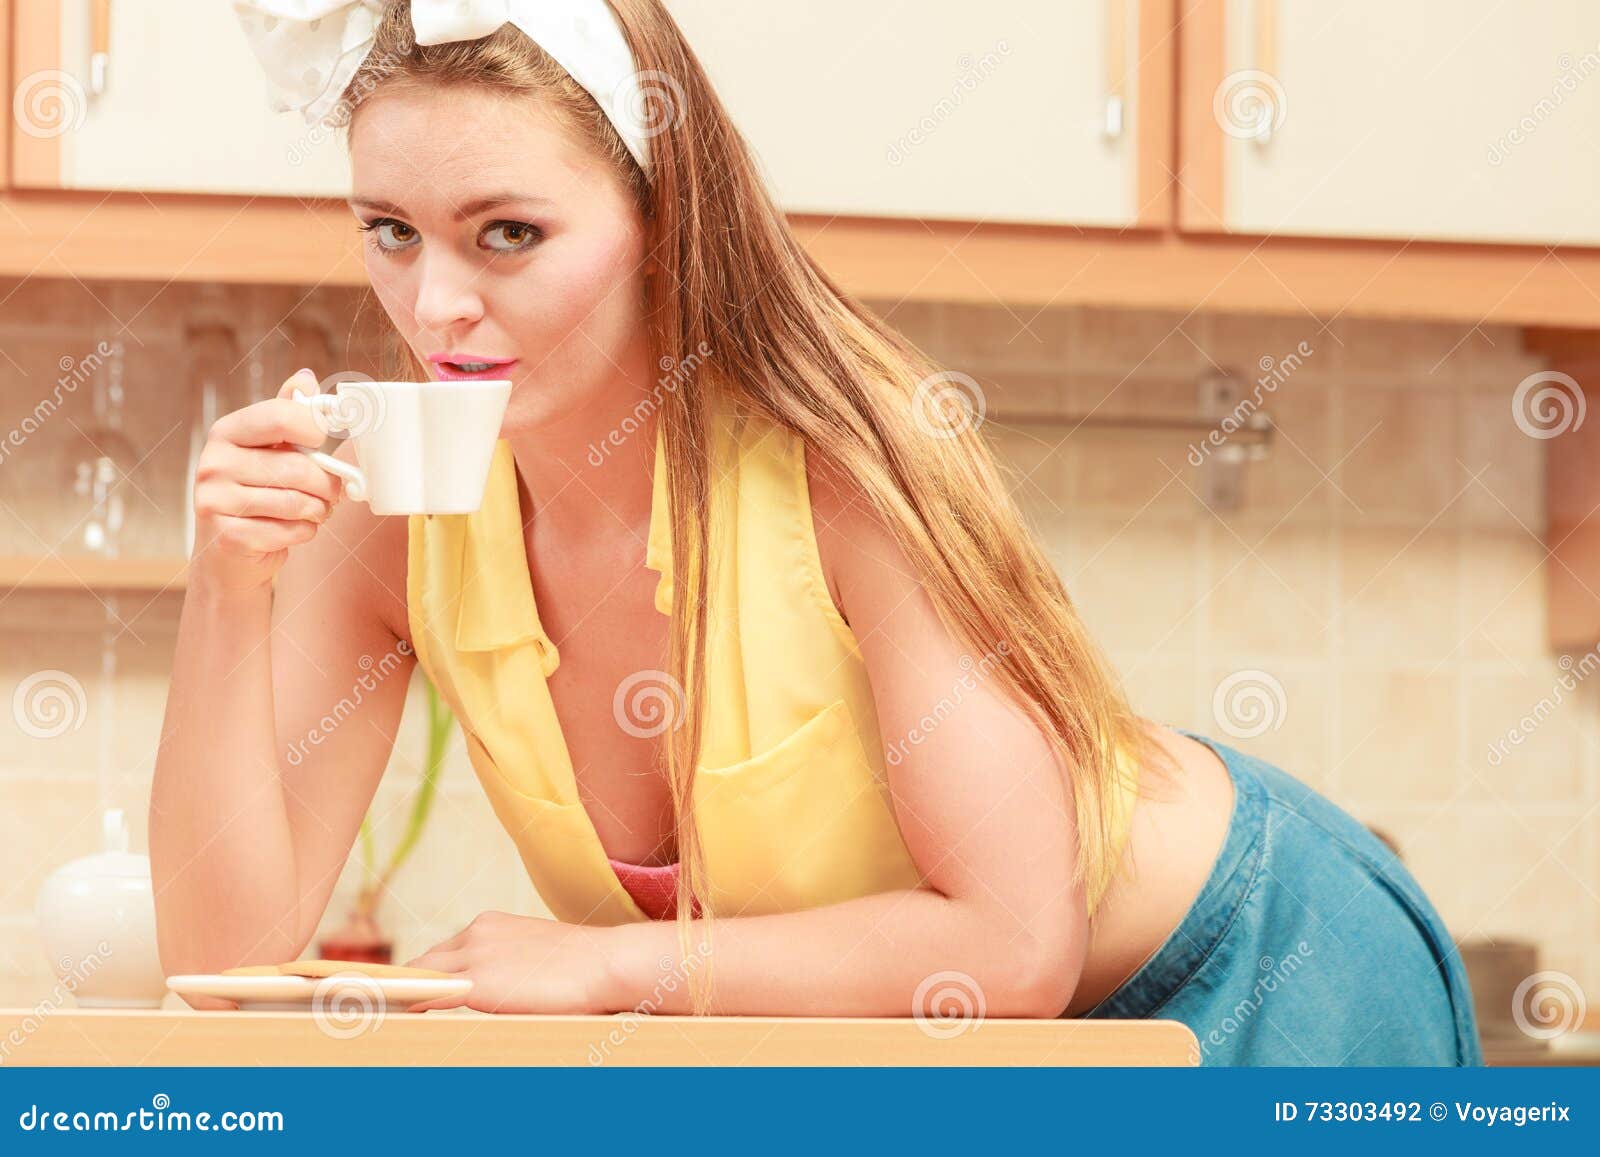 https://thumbs.dreamstime.com/z/pretty-pin-up-girl-drinking-tea-coffee-home-gorgeous-young-retro-woman-hot-beverage-relaxing-73303492.jpg